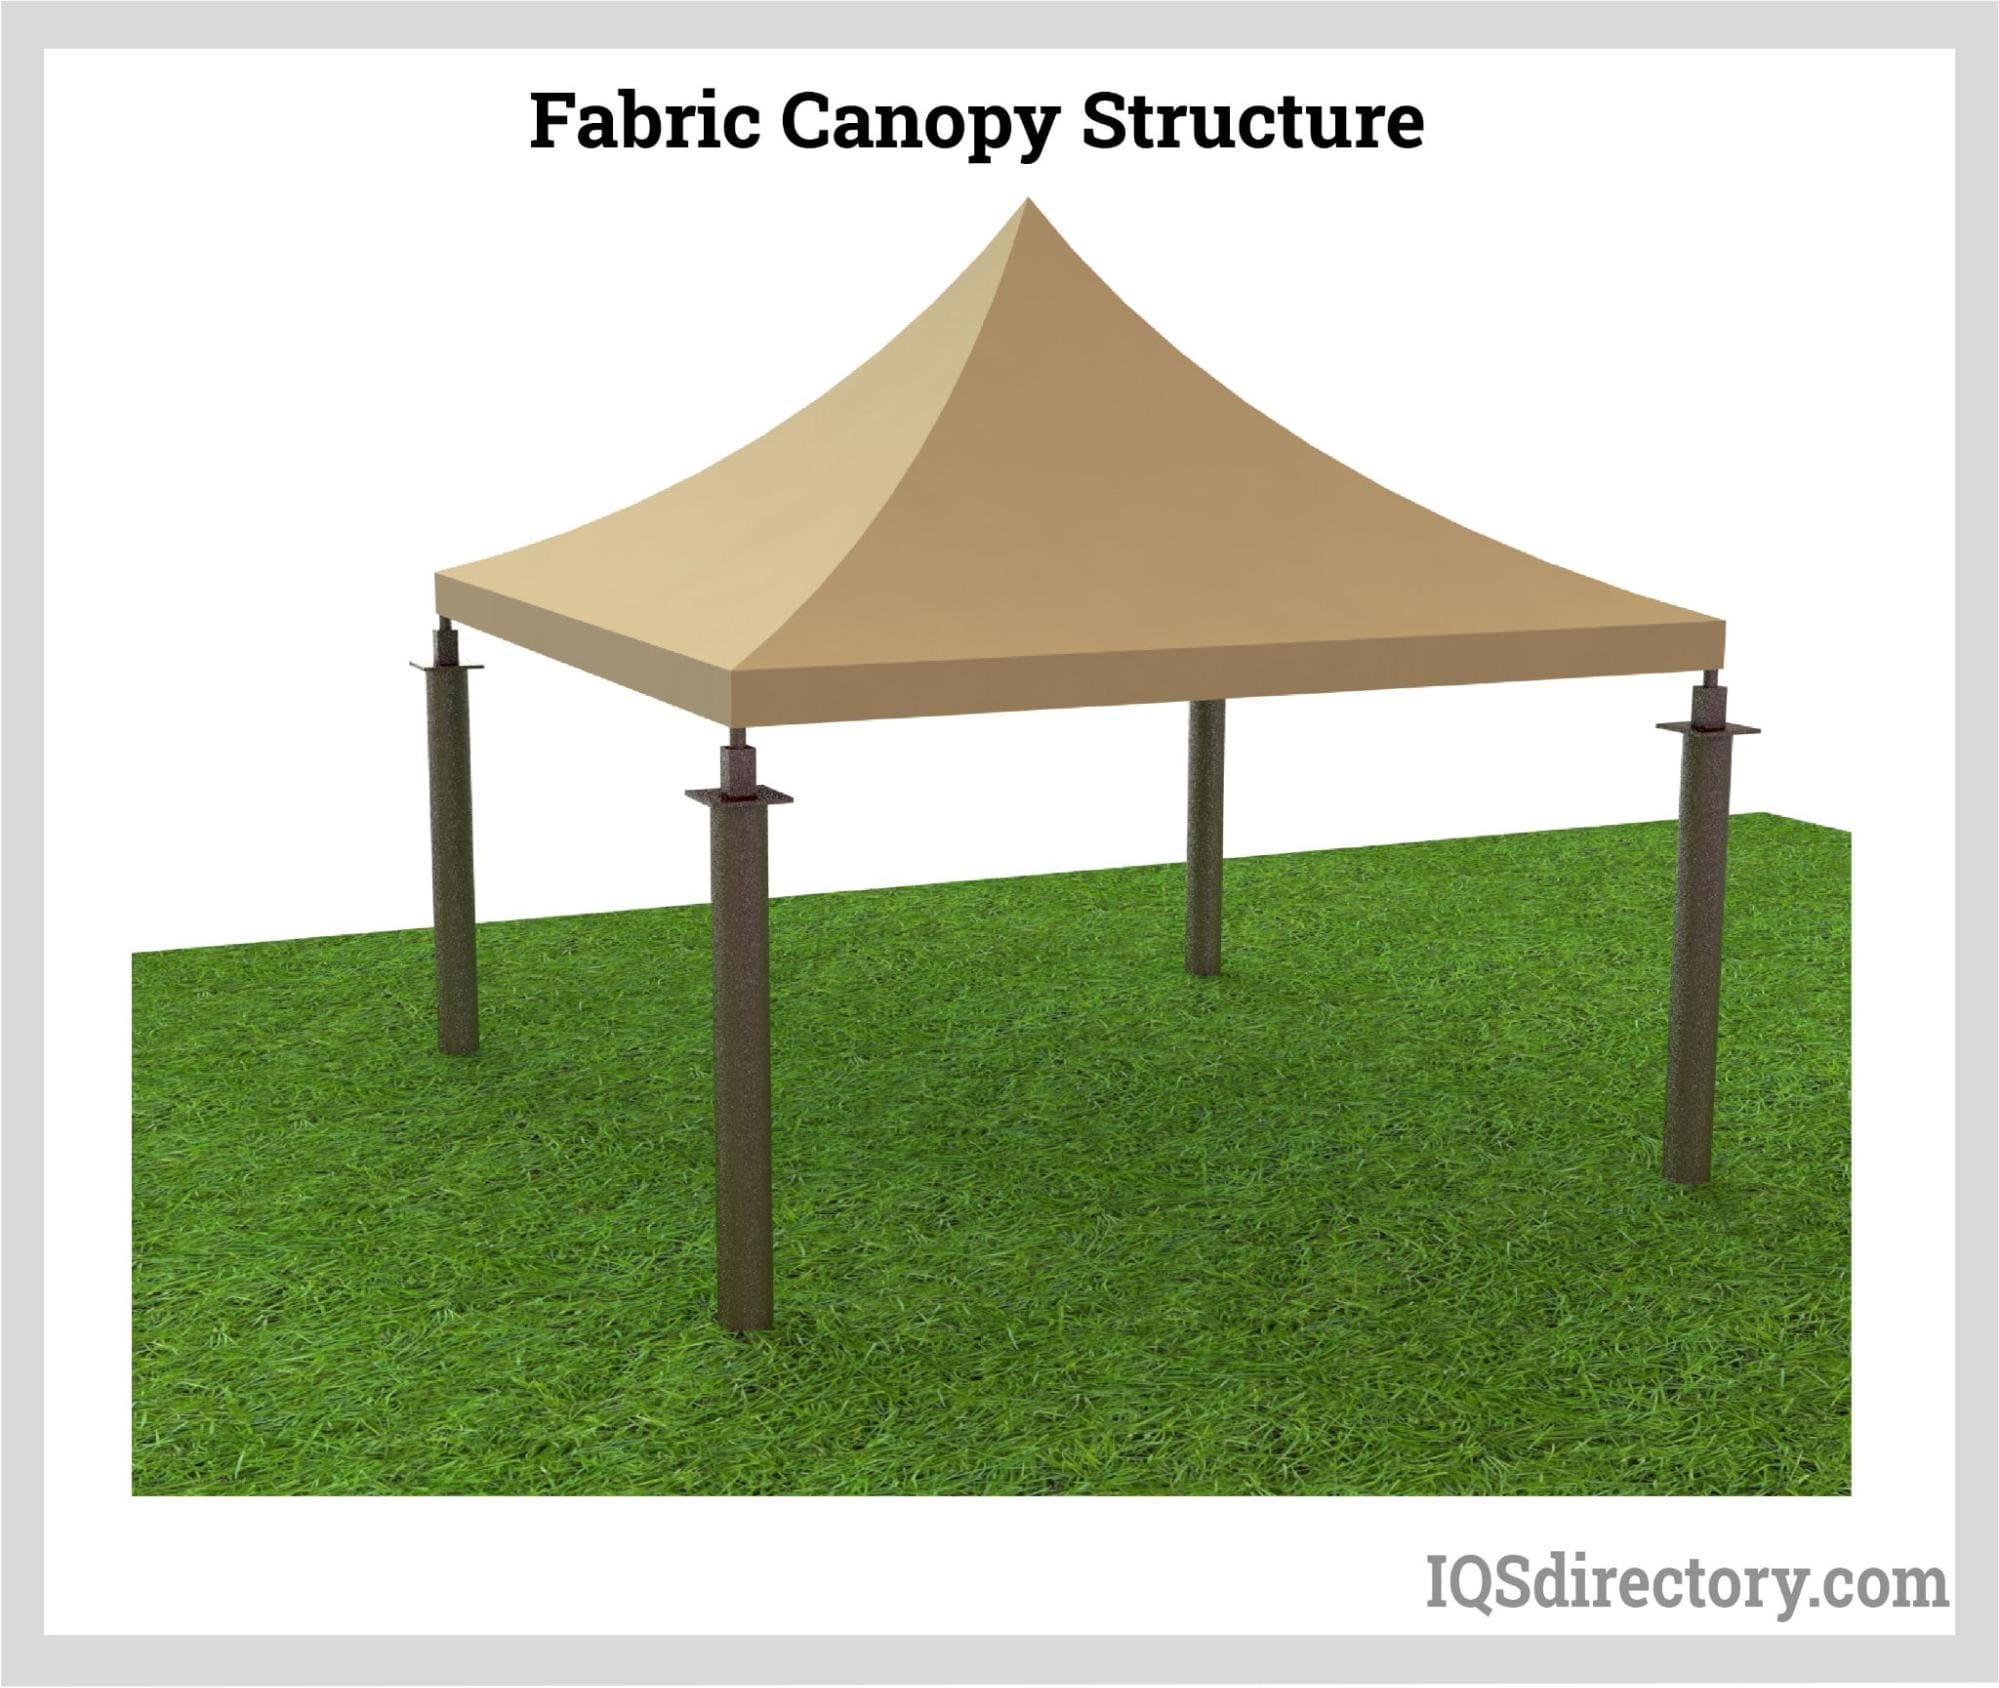 Fabric Canopy Structure